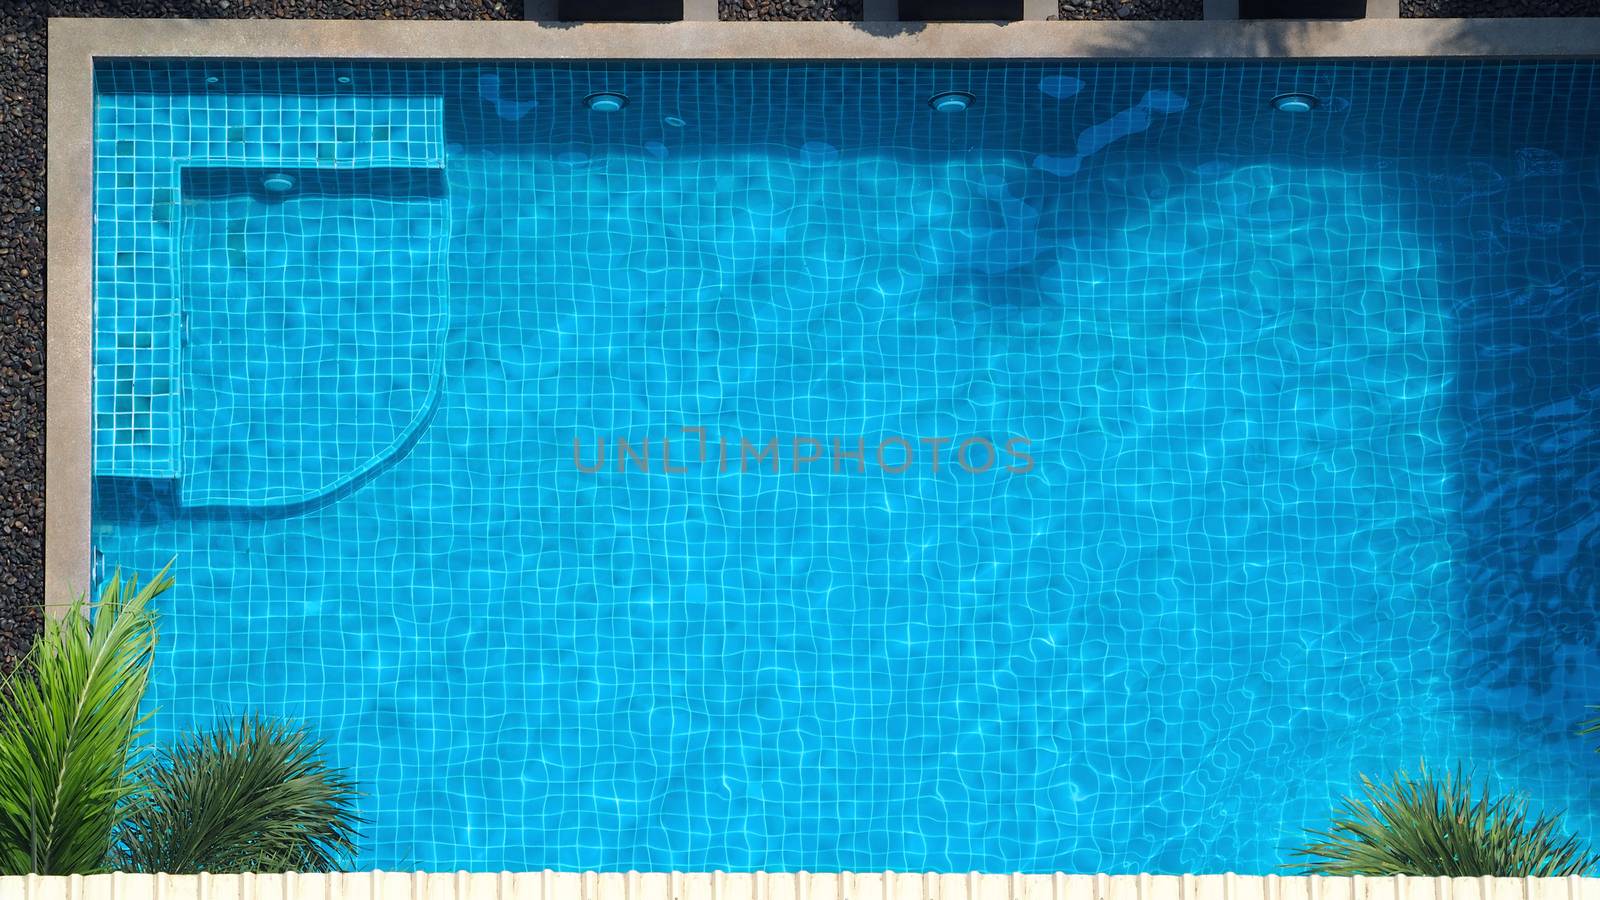 Top view images of swimming pool in summer season by gnepphoto